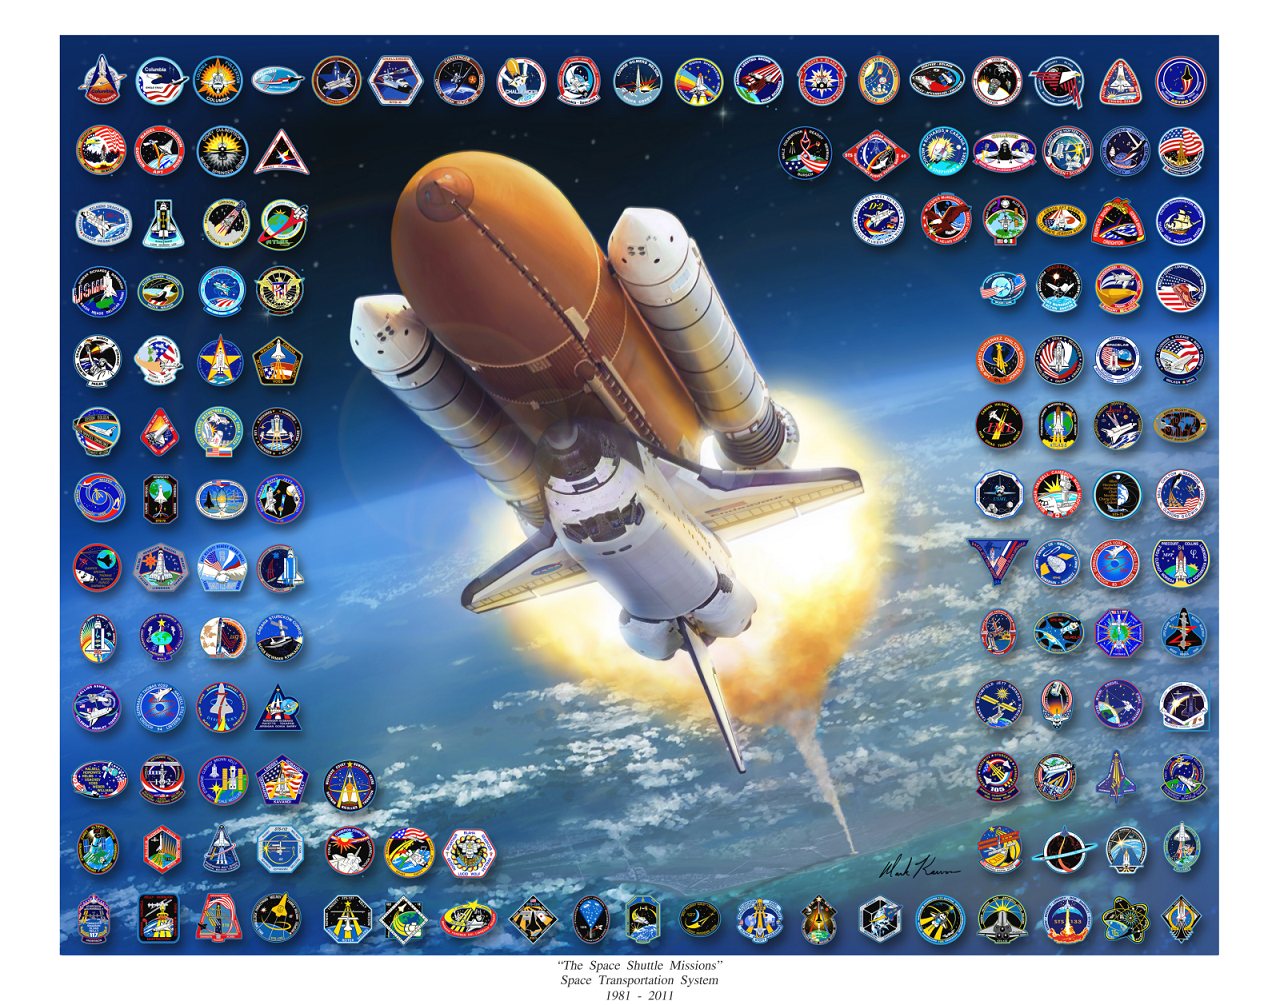 "Space Shuttle Missions" by Mark Karvon